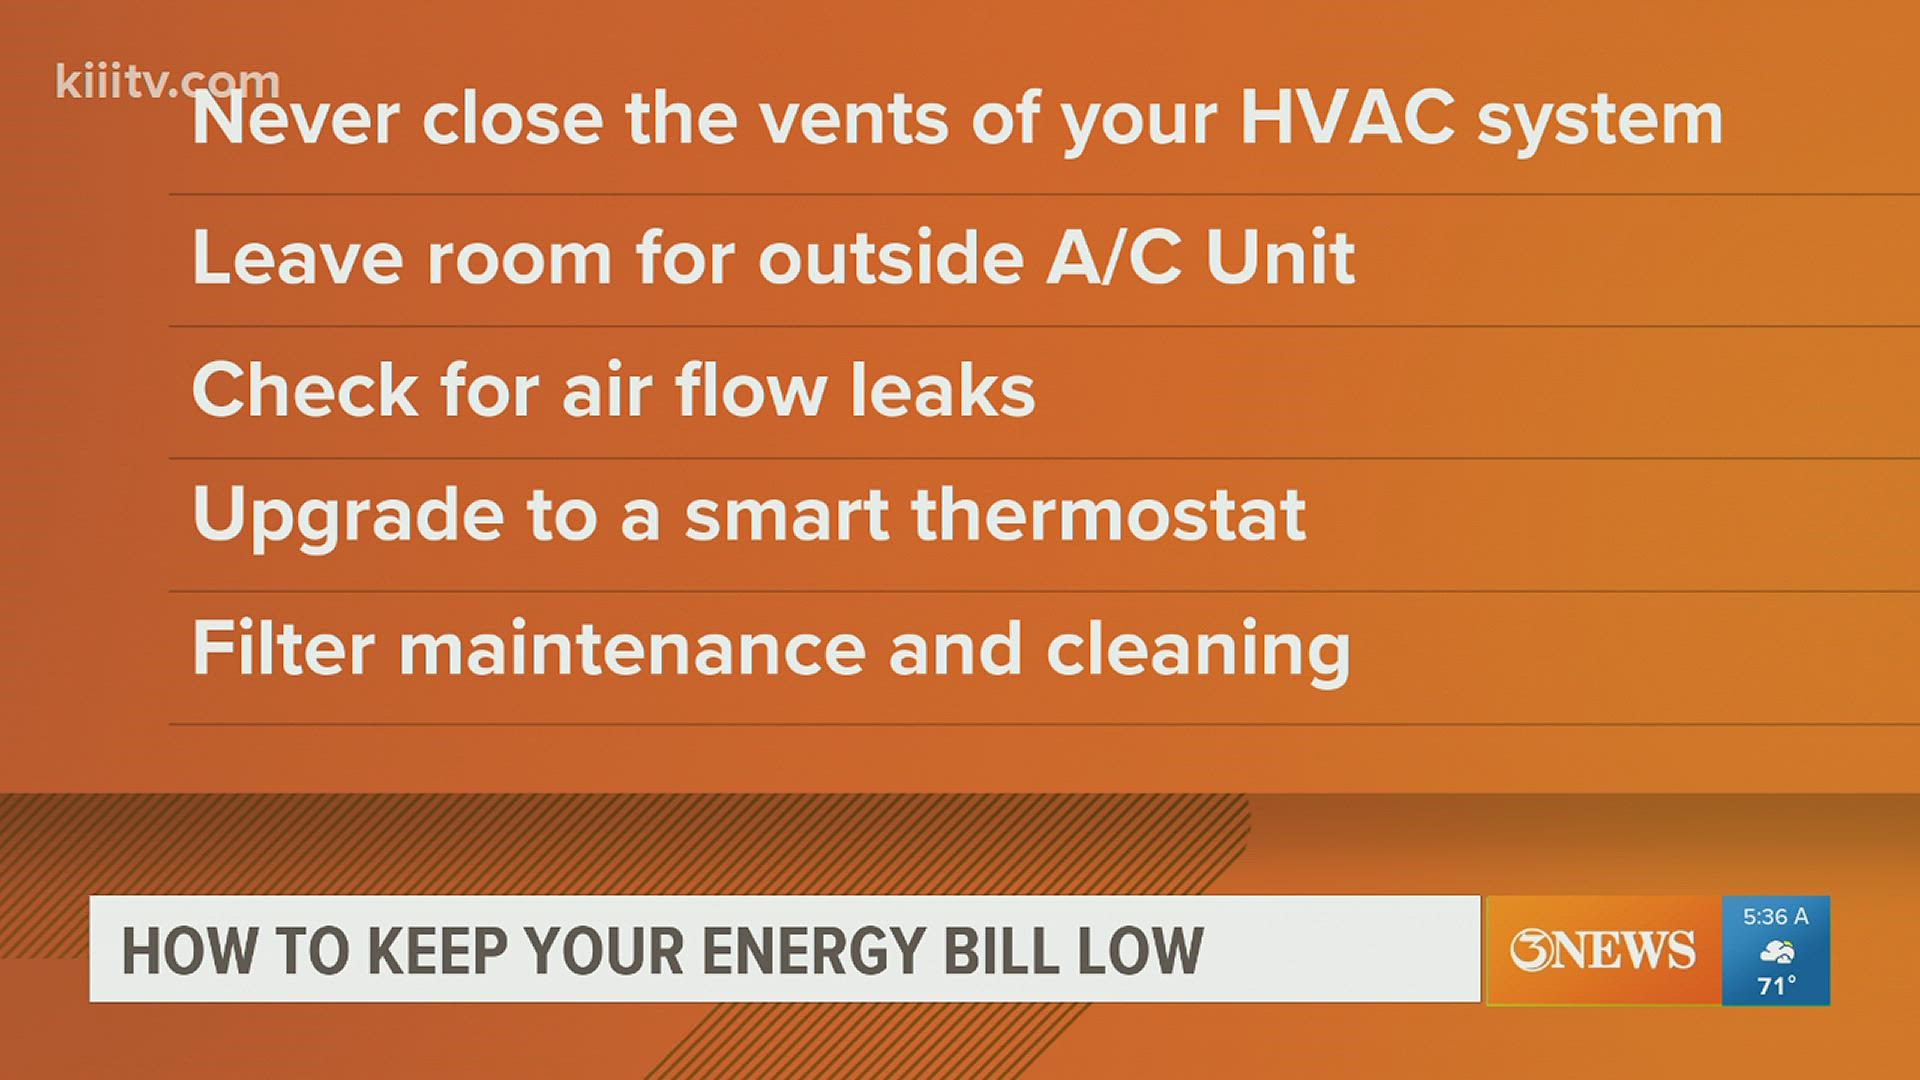 There are several ways to help lower your energy costs during the summer months.